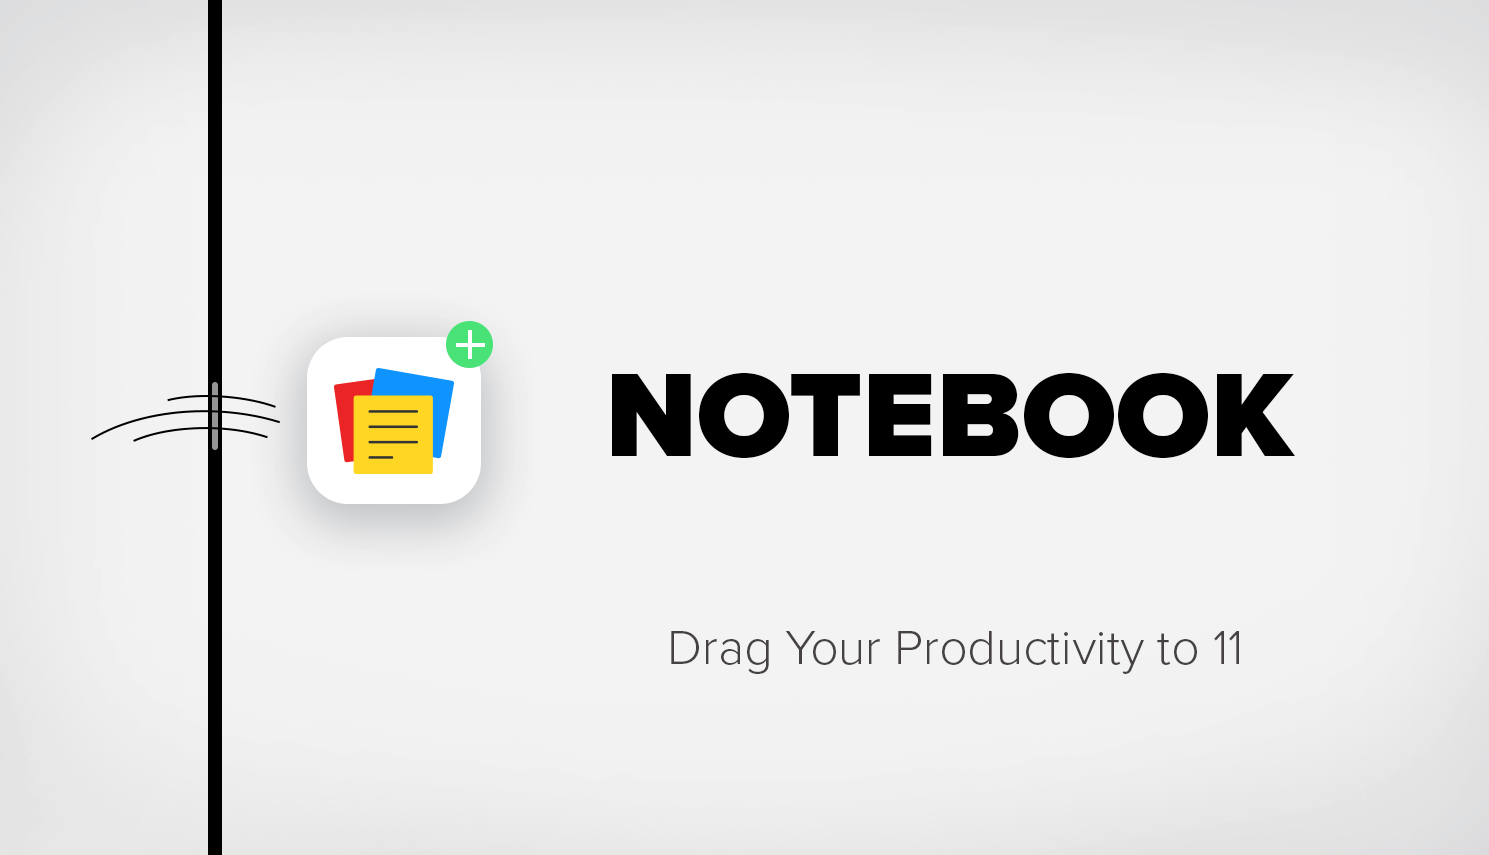 Drag Your Productivity to 11 with Notebook for iPad Pro and More